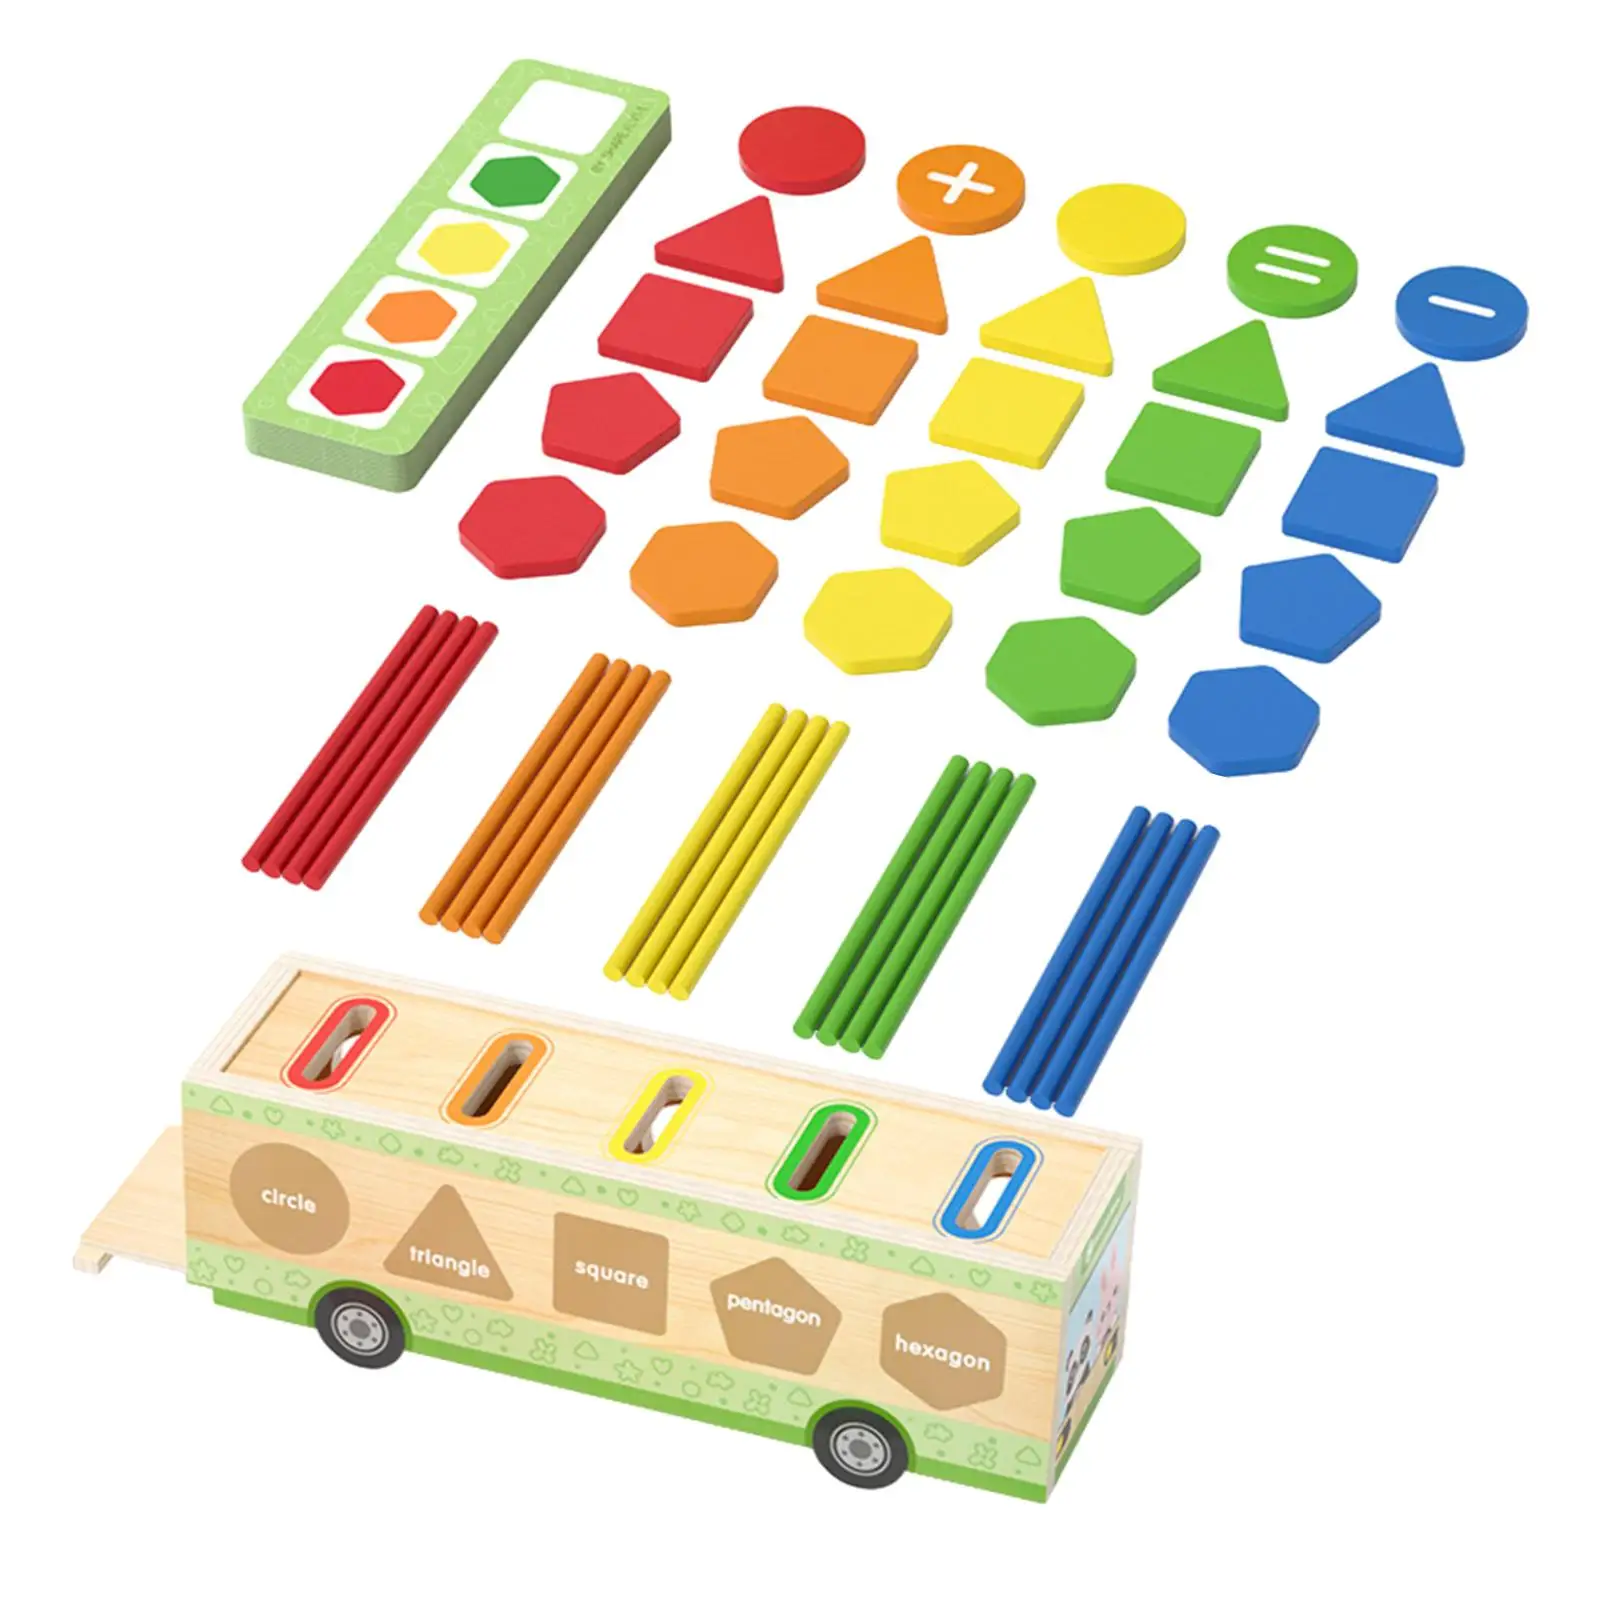 

Wooden Color Shape Sorting Box Game Preschool Learning Toy Early Educational Toys Montessori Toys for Children Boys Girls Gifts